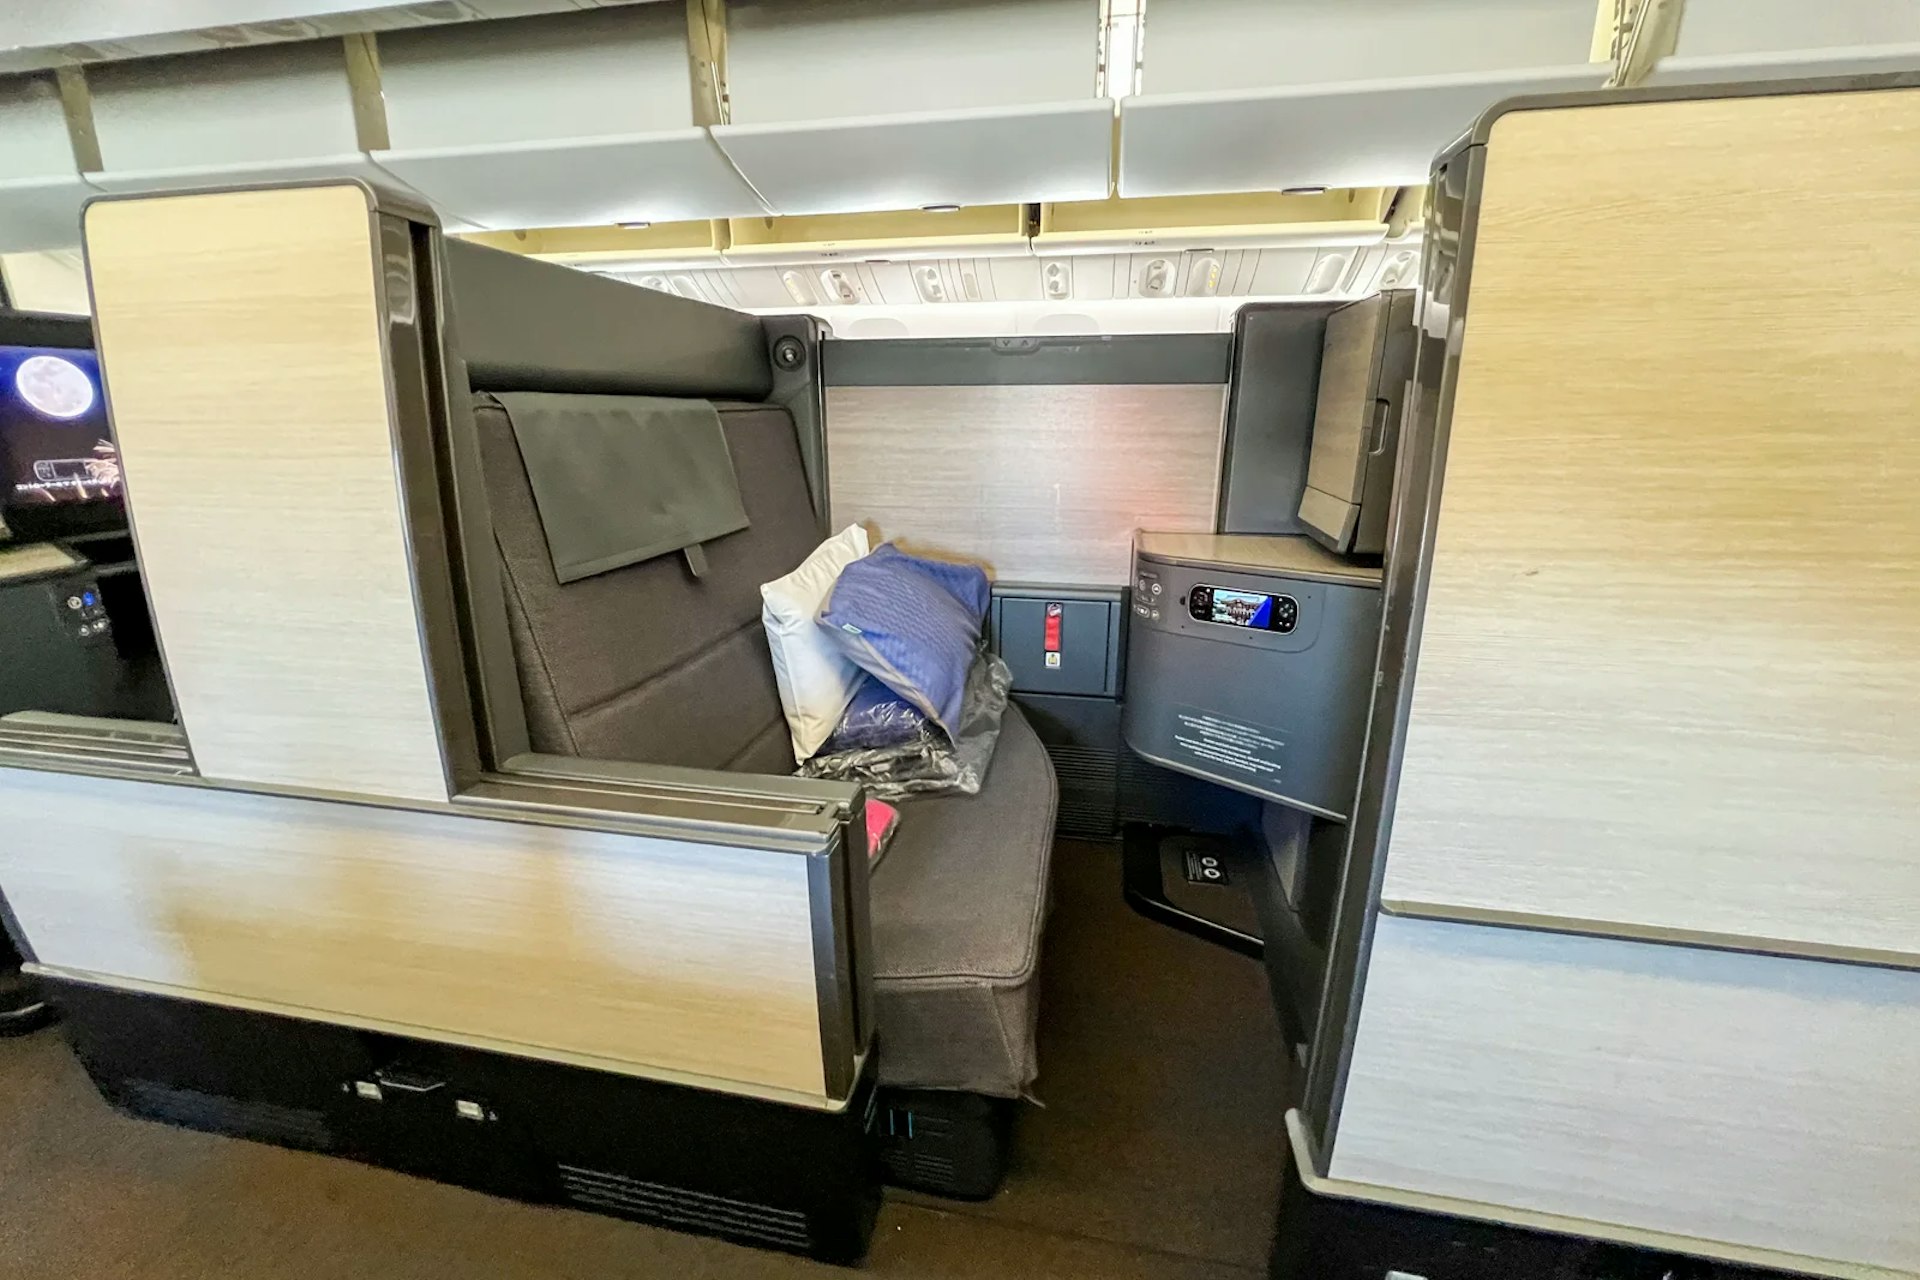 All Nippon Airways' esteemed “The Room” business class from just 88,000 miles round-trip